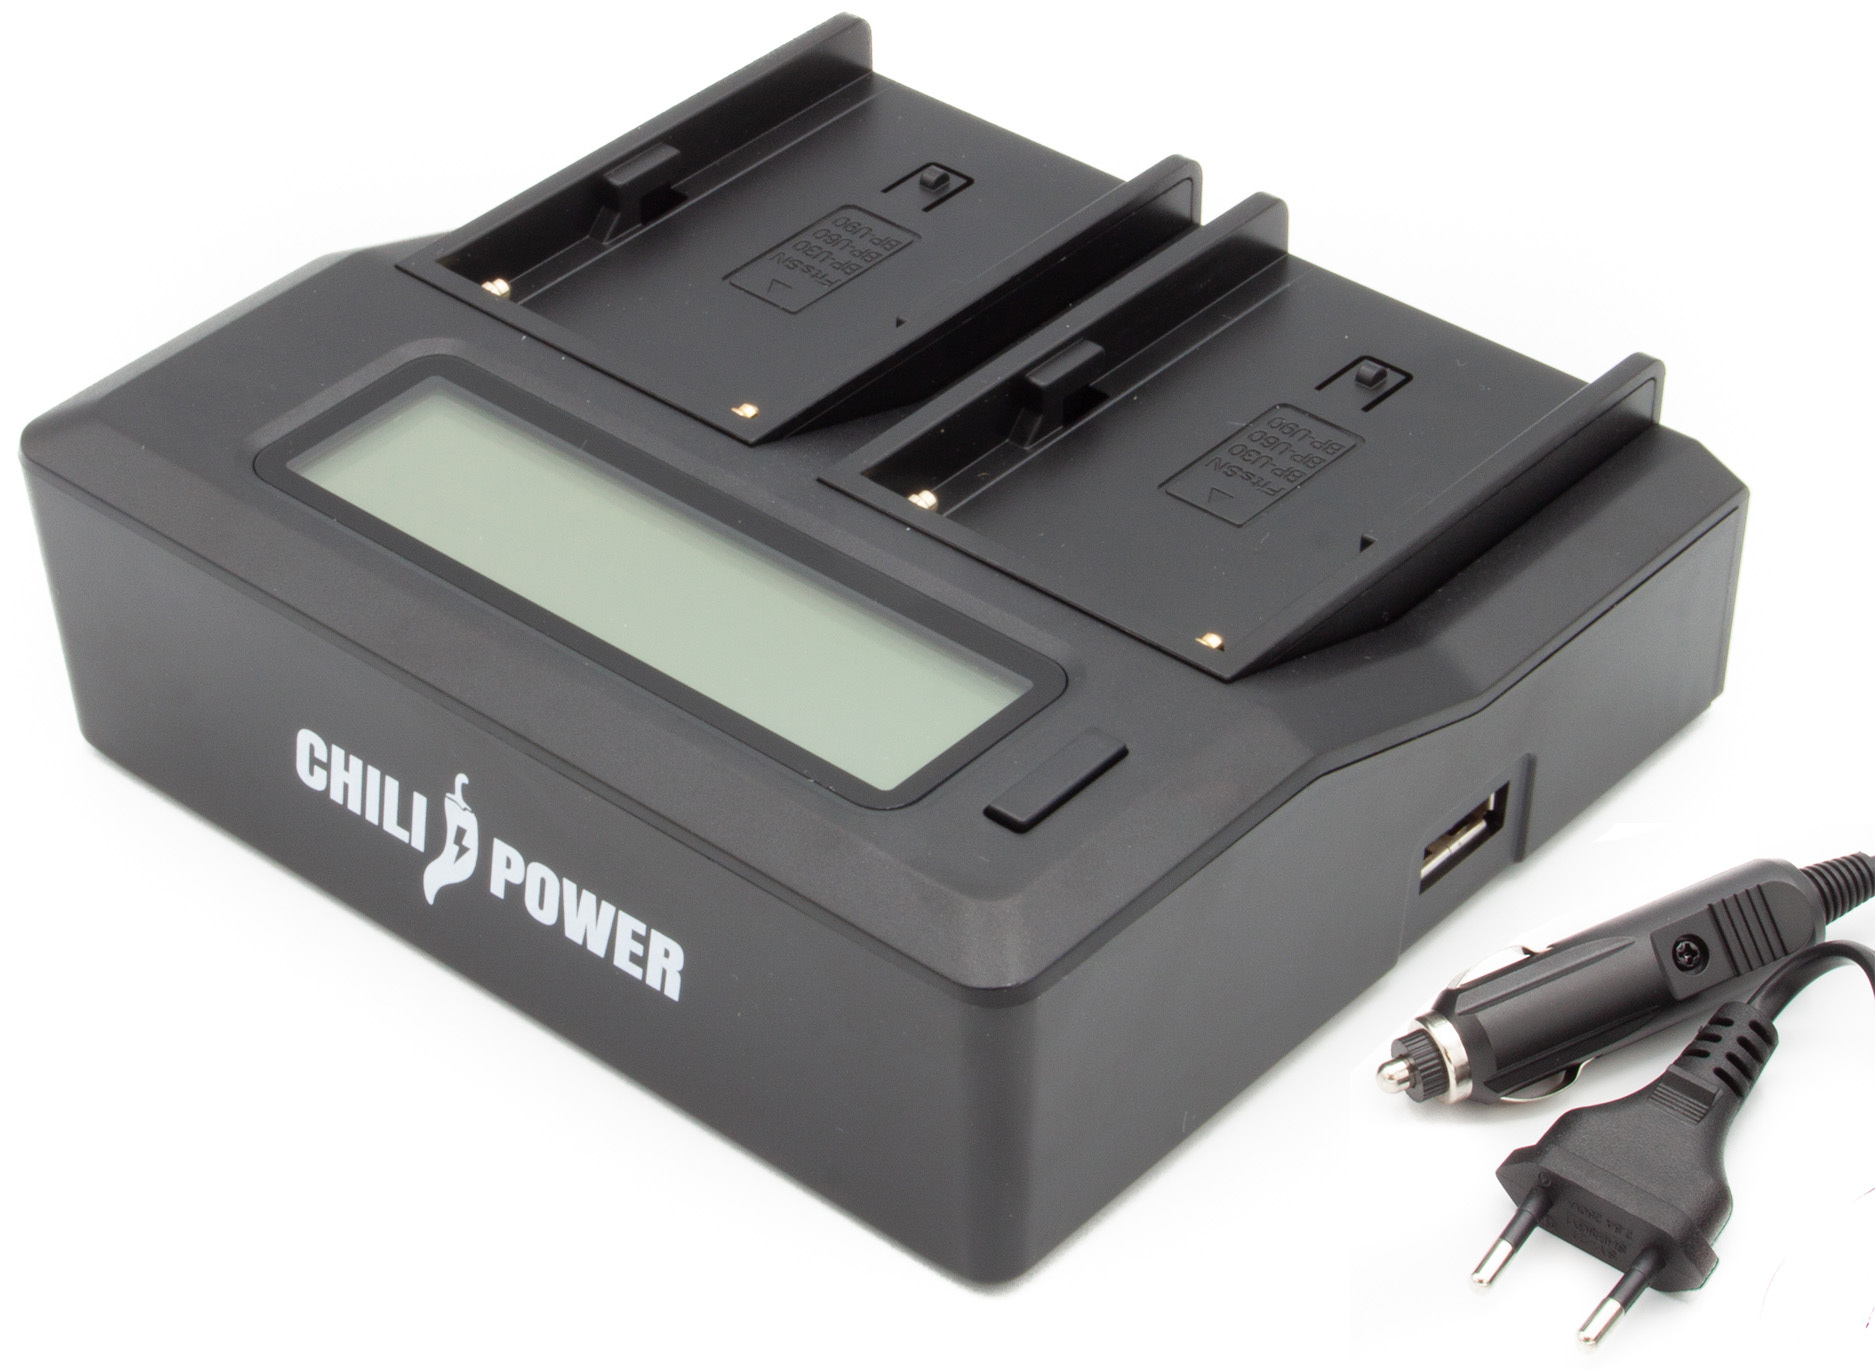 ChiliPower Duo oplader voor 2 camera-accu's Sony NP-F960 en NP-F970 - met LCD scherm Duo oplader voor 2 camera-accu's Sony NP-F960 en NP-F970 - met LCD scherm